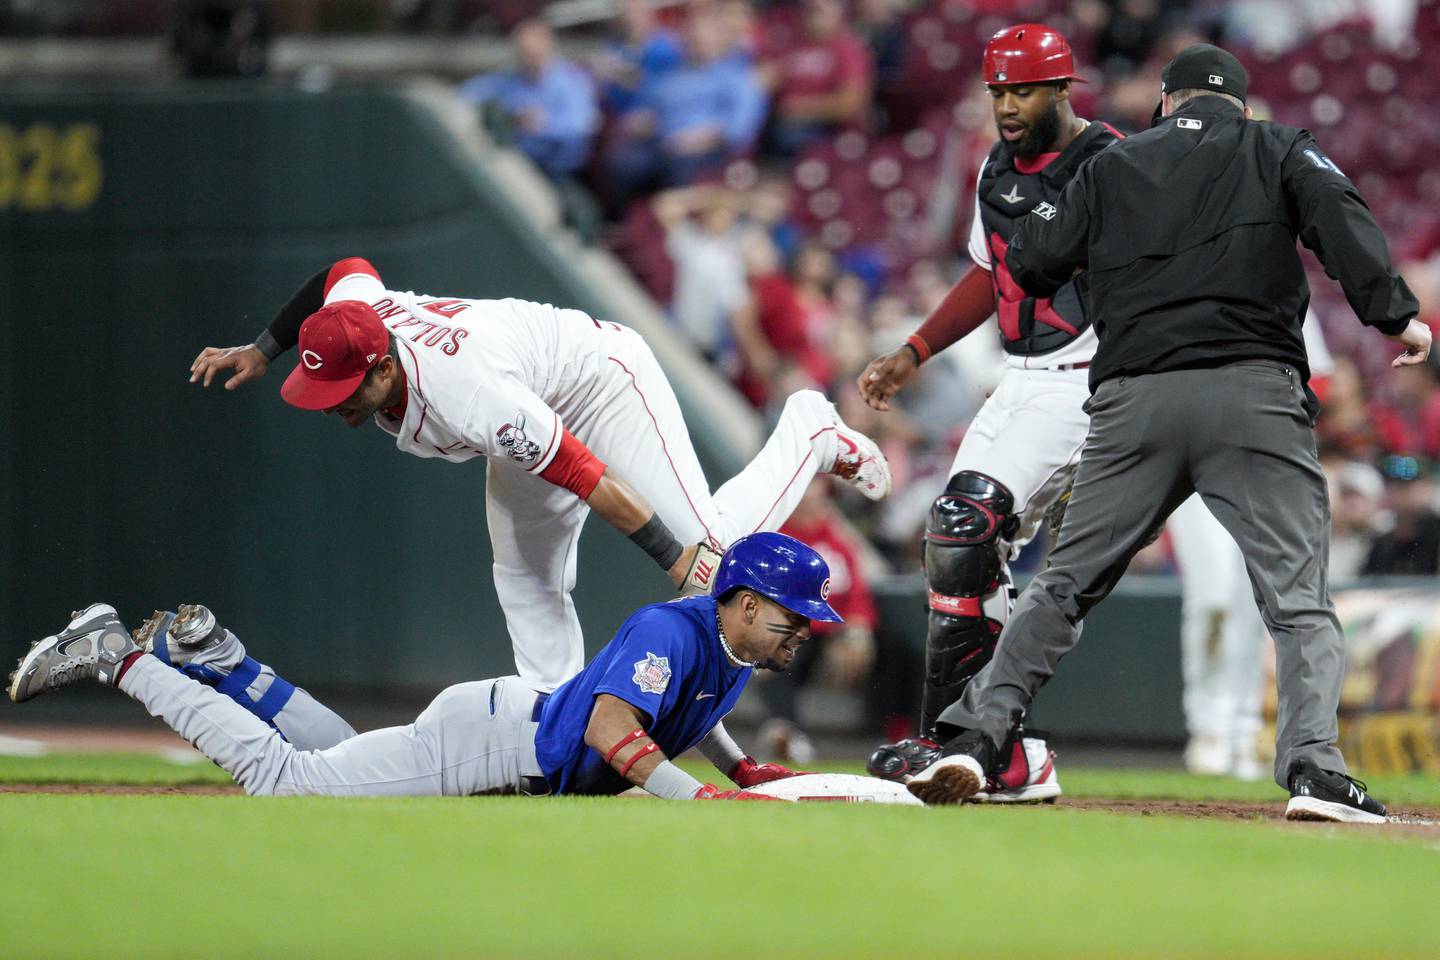 The Cubs' Christopher Morel dives back to first after reaching on a throwing error by Reds third baseman Spencer Steer during the sixth inning Tuesday, Oct. 4, 2022, in Cincinnati.